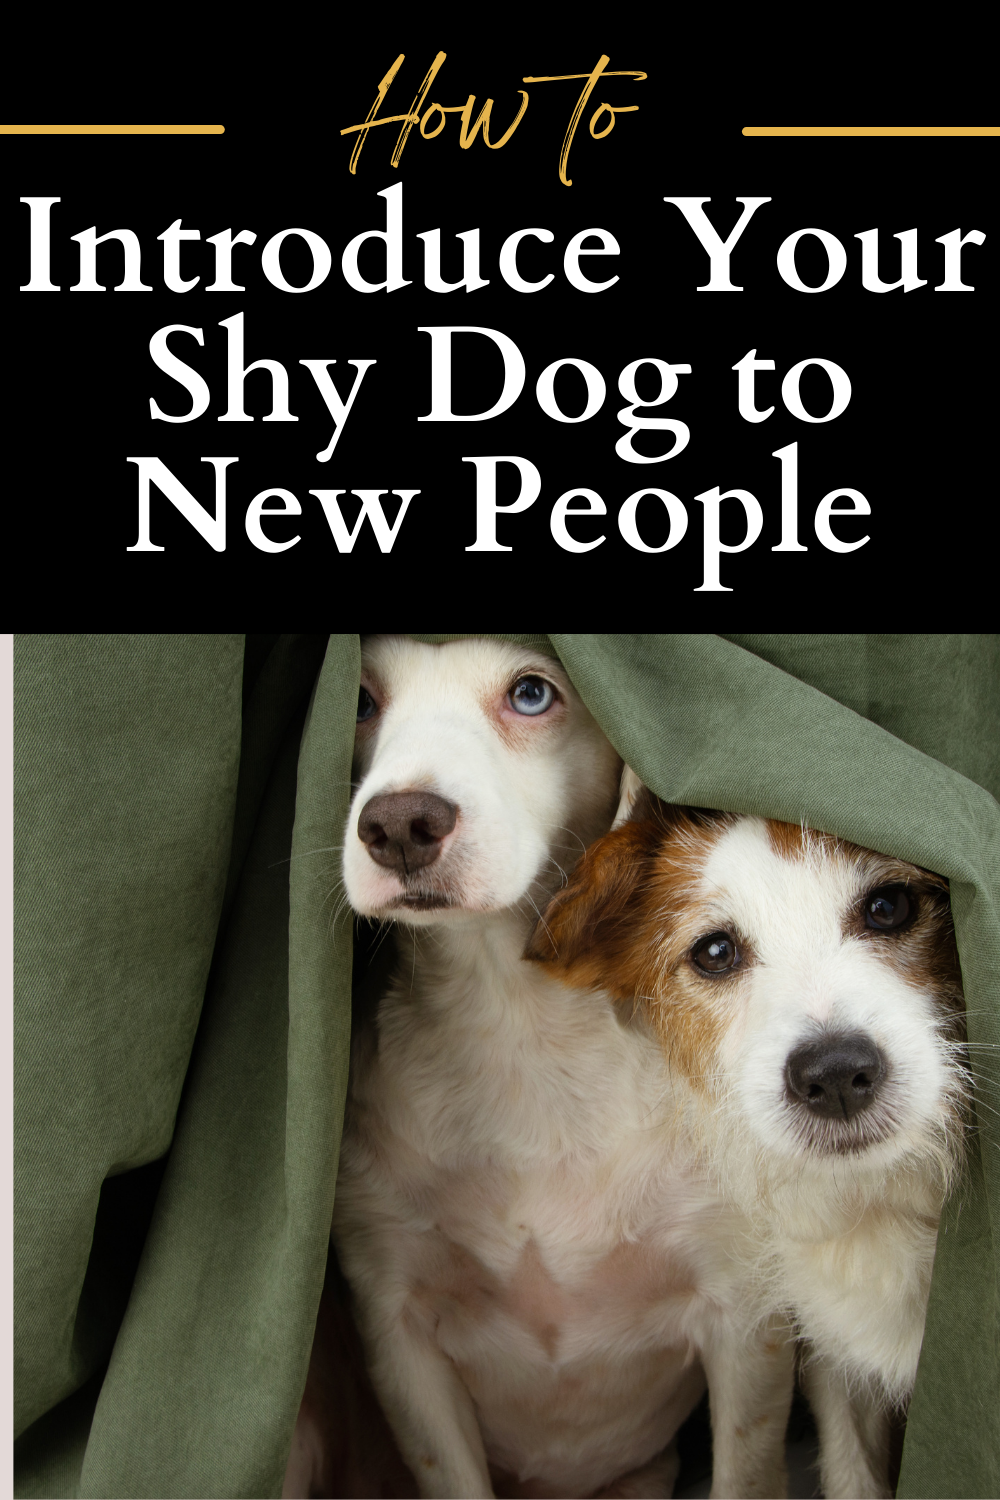 The Best Way to Introduce Your Fearful Dog to New People